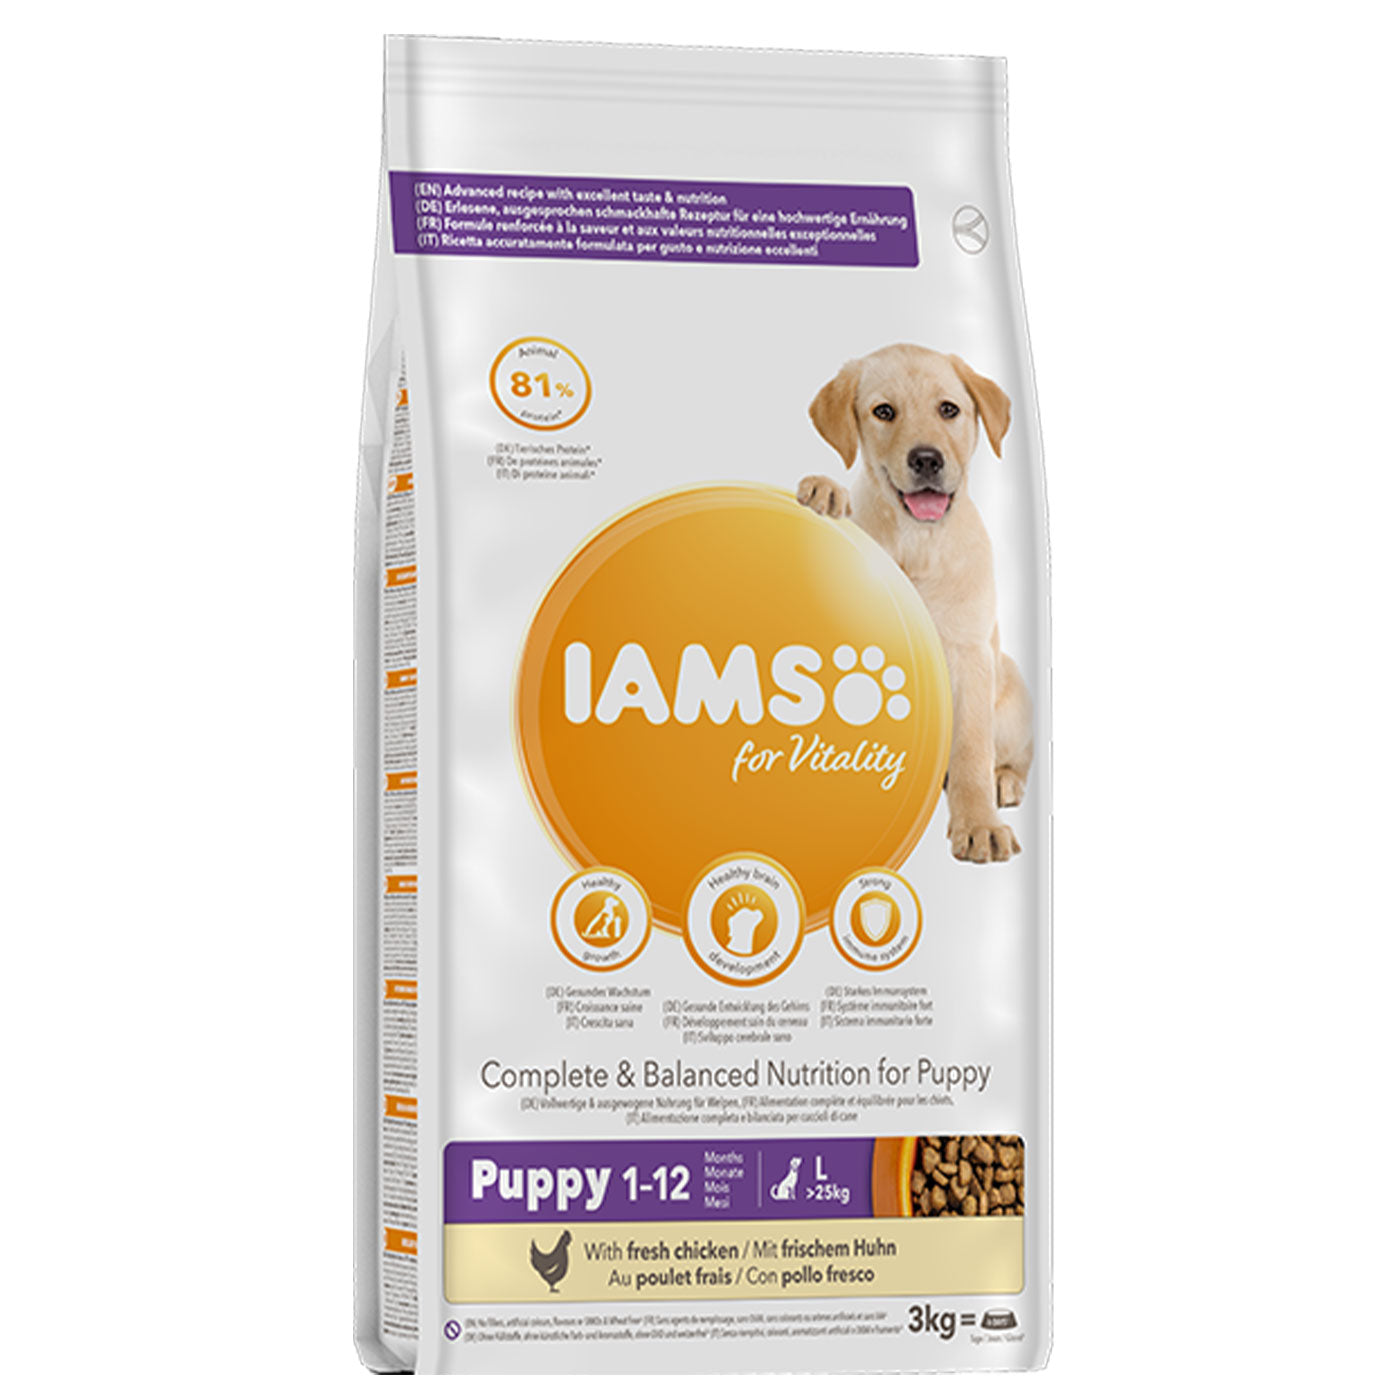 IAMS Vitality Large Breed Puppy Food with Fresh Chicken